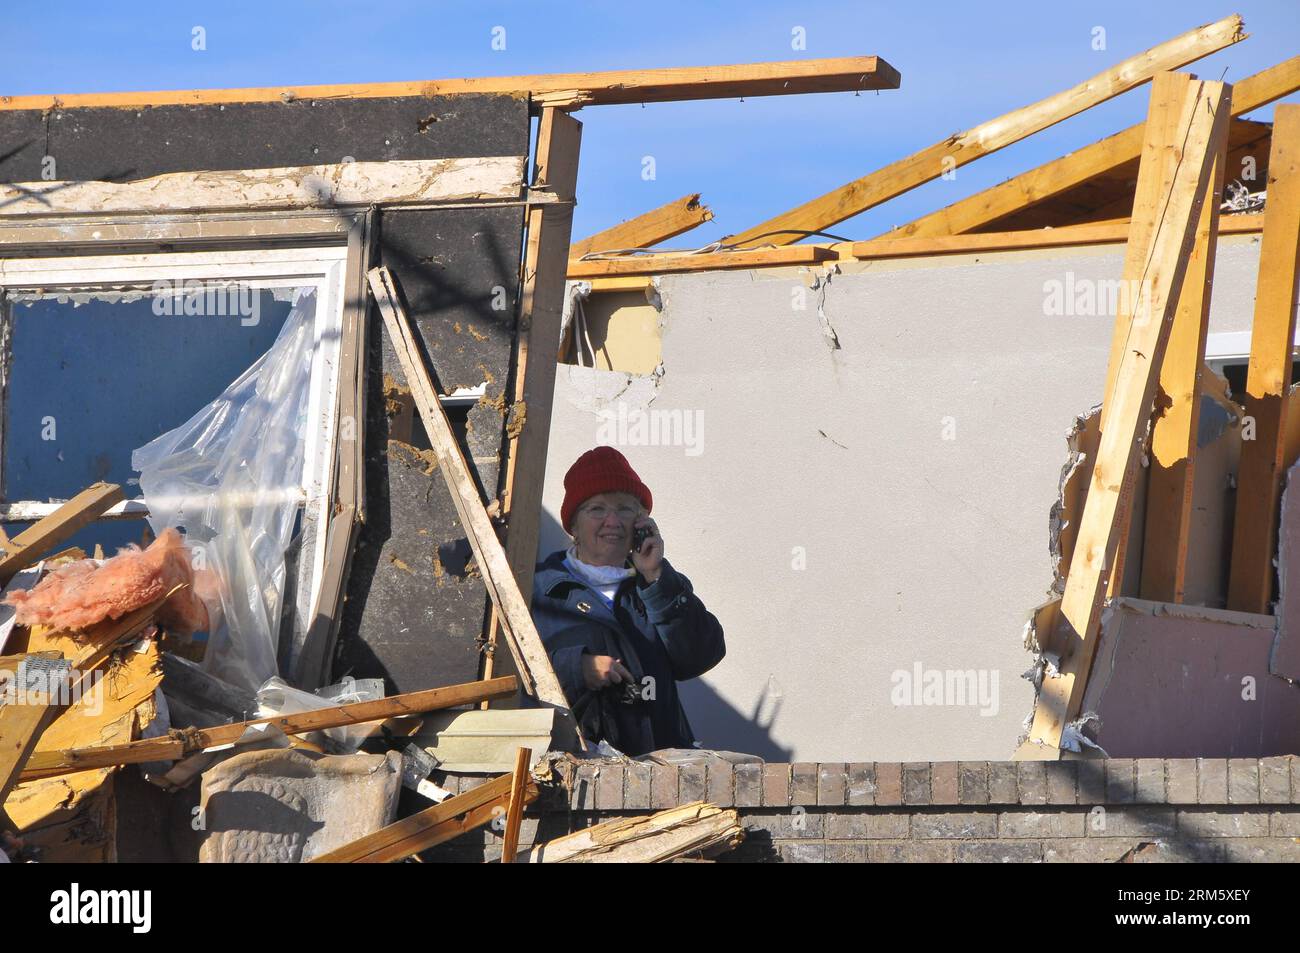 Bildnummer: 60732974  Datum: 19.11.2013  Copyright: imago/Xinhua ILLINOIS, Nov. 19, 2013 (Xinhua) -- A local resident stands in ruins after a tornado attack in the town of Washington in Illinois, the United States, on Nov. 19, 2013. At least 16 were killed during tornado attacks on Sunday, according to the National Weather Service. (Xinhua/Zhang Baoping)(ybg) US-ILLINOIS-TORNADO PUBLICATIONxNOTxINxCHN Gesellschaft USA Naturkatastrophe x0x xsk 2013 quer     60732974 Date 19 11 2013 Copyright Imago XINHUA Illinois Nov 19 2013 XINHUA a Local Resident stands in Ruins After a Tornado Attack in The Stock Photo